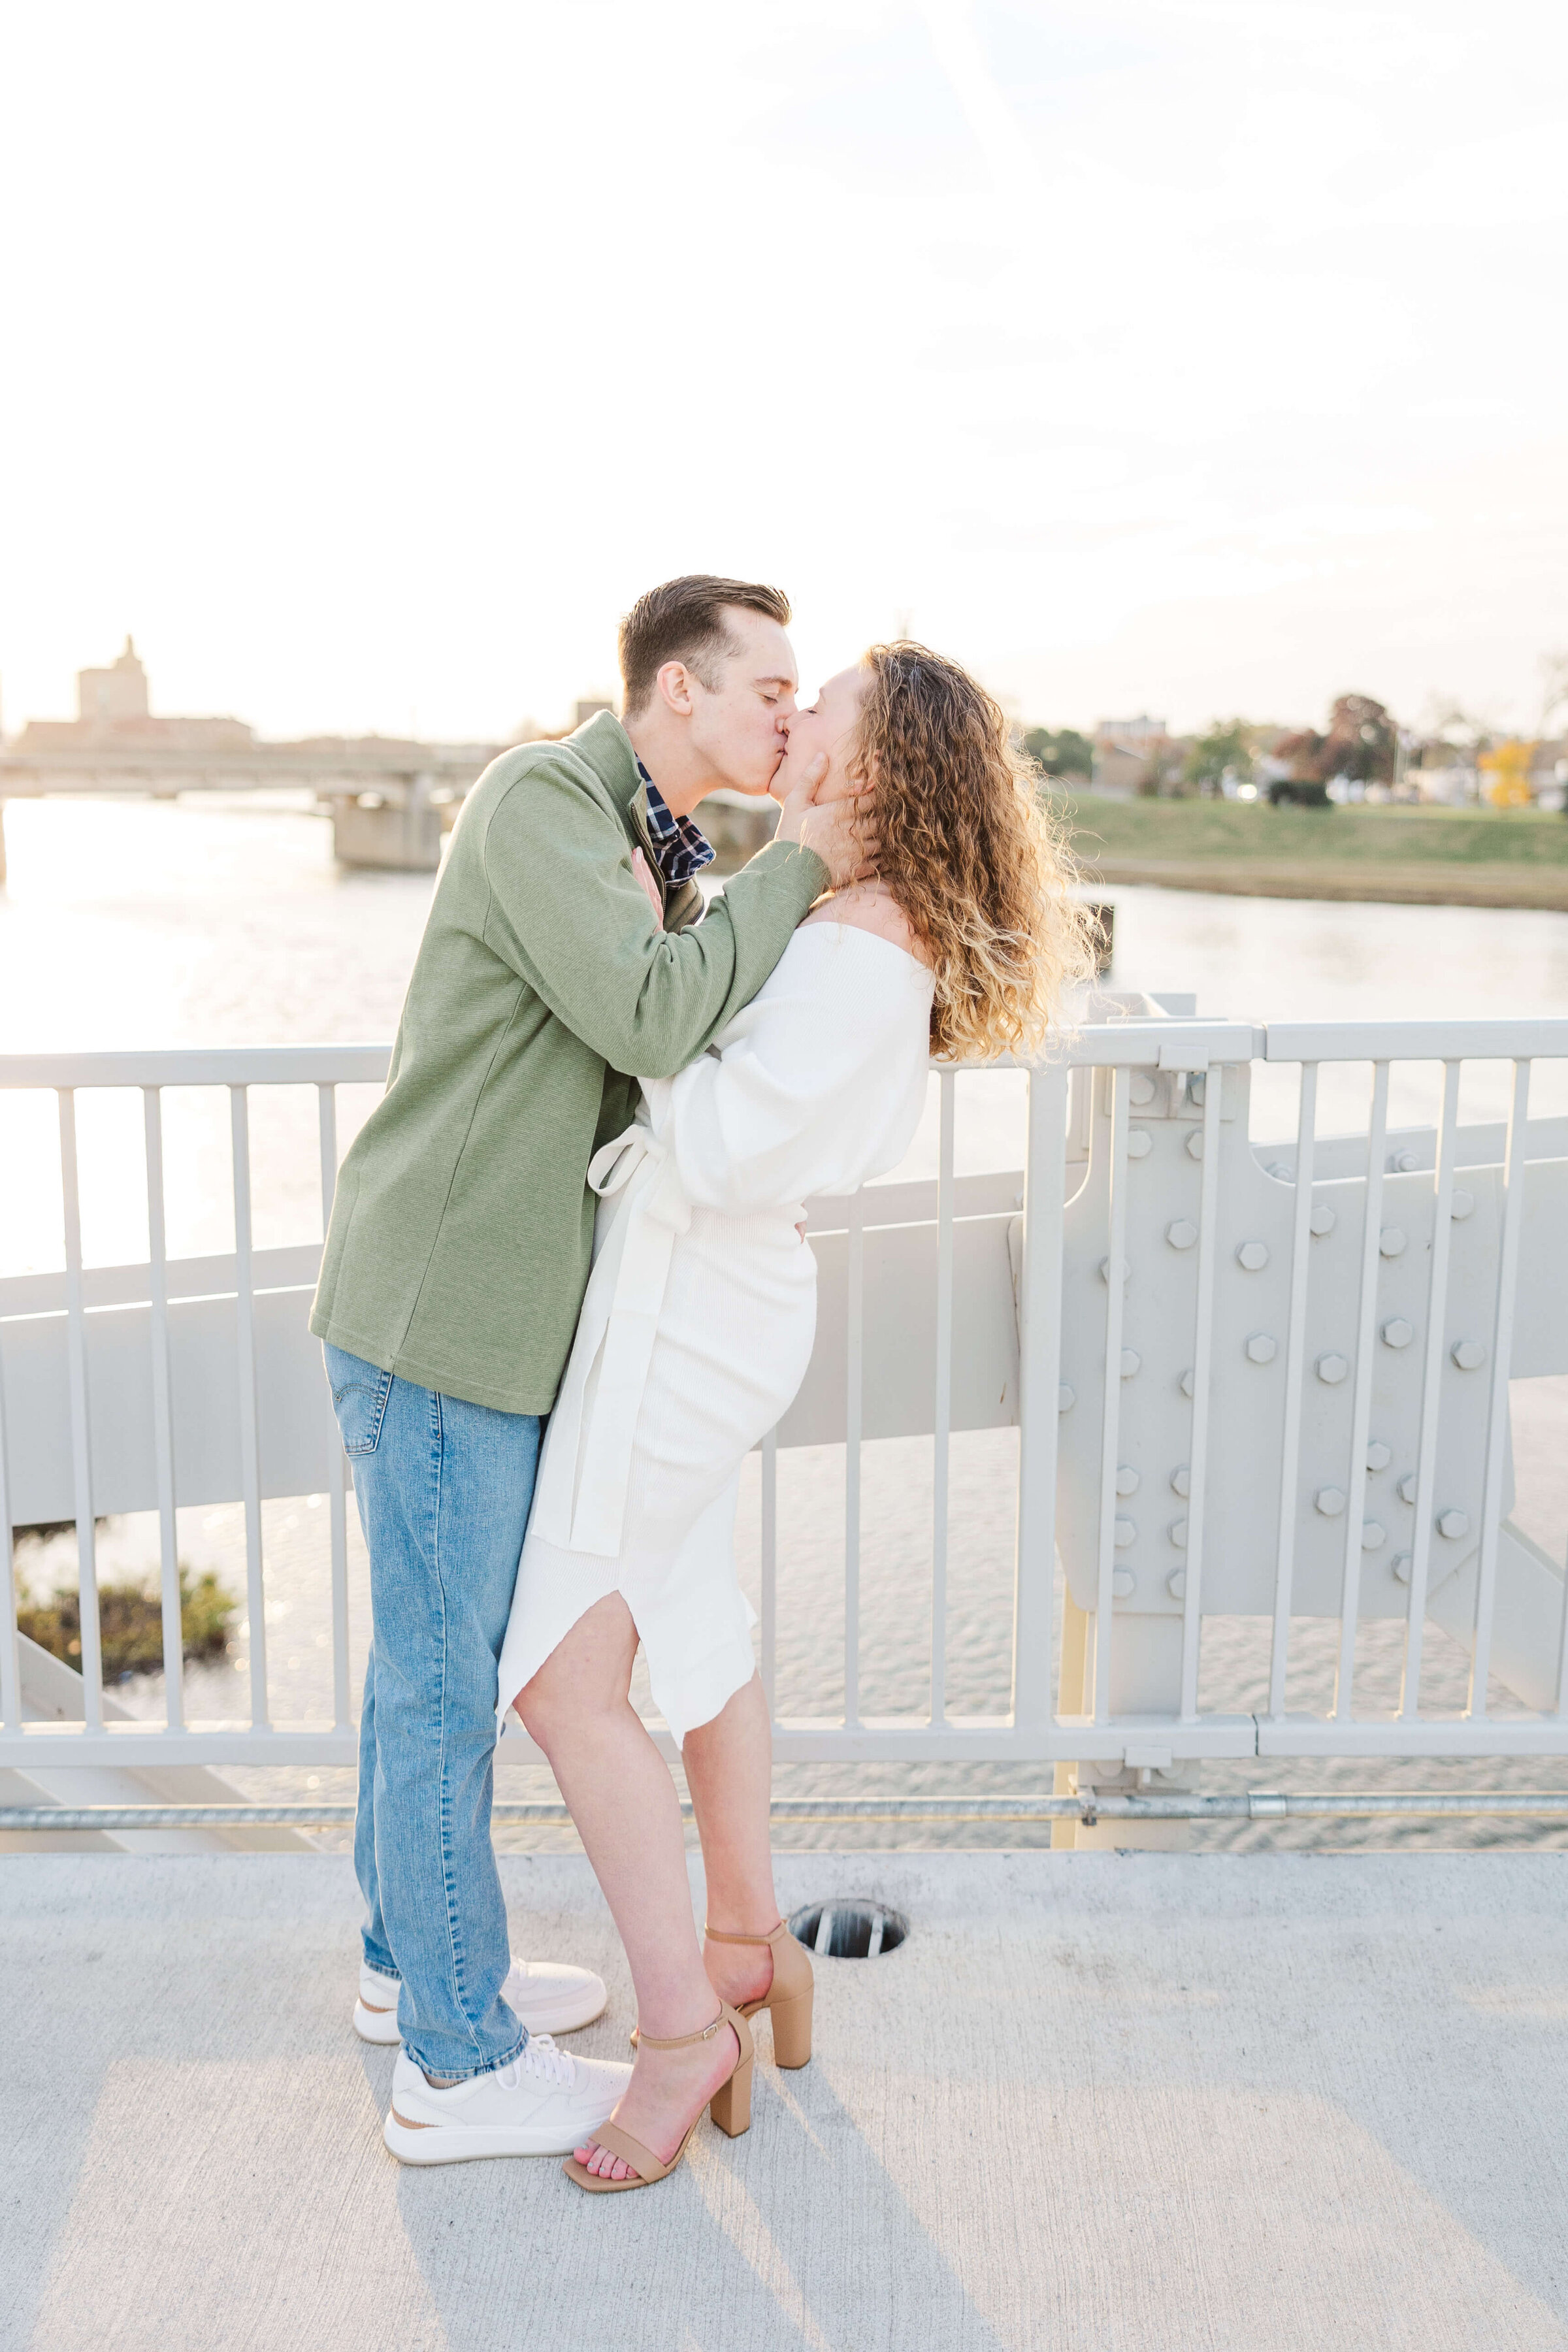 A man in a green sweater and jeans kisses his fiancee and dips her back. They are standing on a bridge in downtown dayton. Photo taken by a dayton wedding photographer.